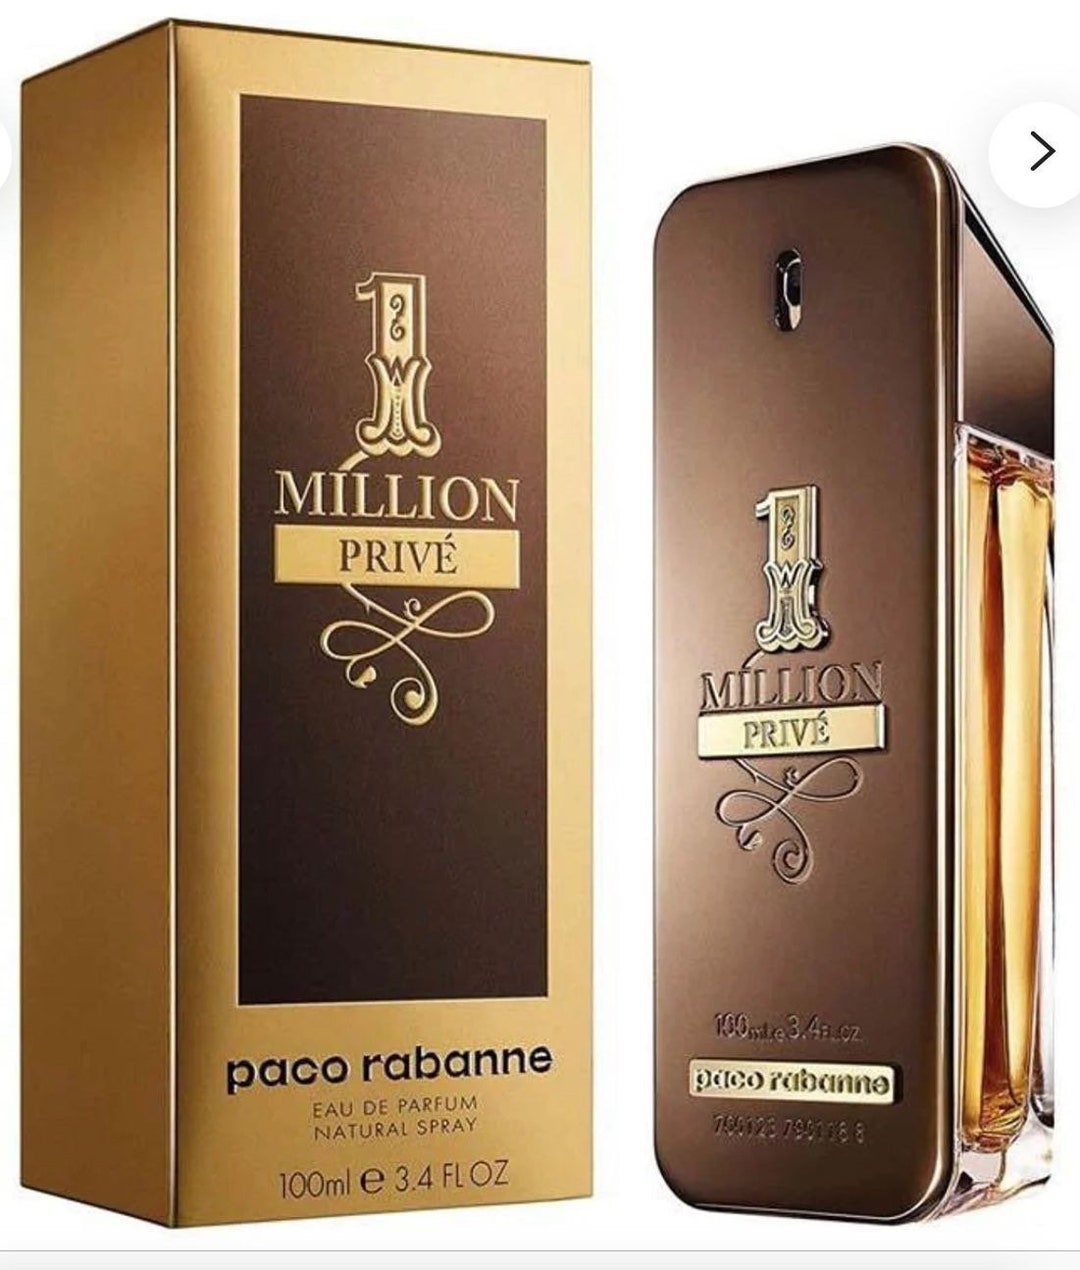 1 Million Prive by Paco Rabanne for Men 100ml - Etsy